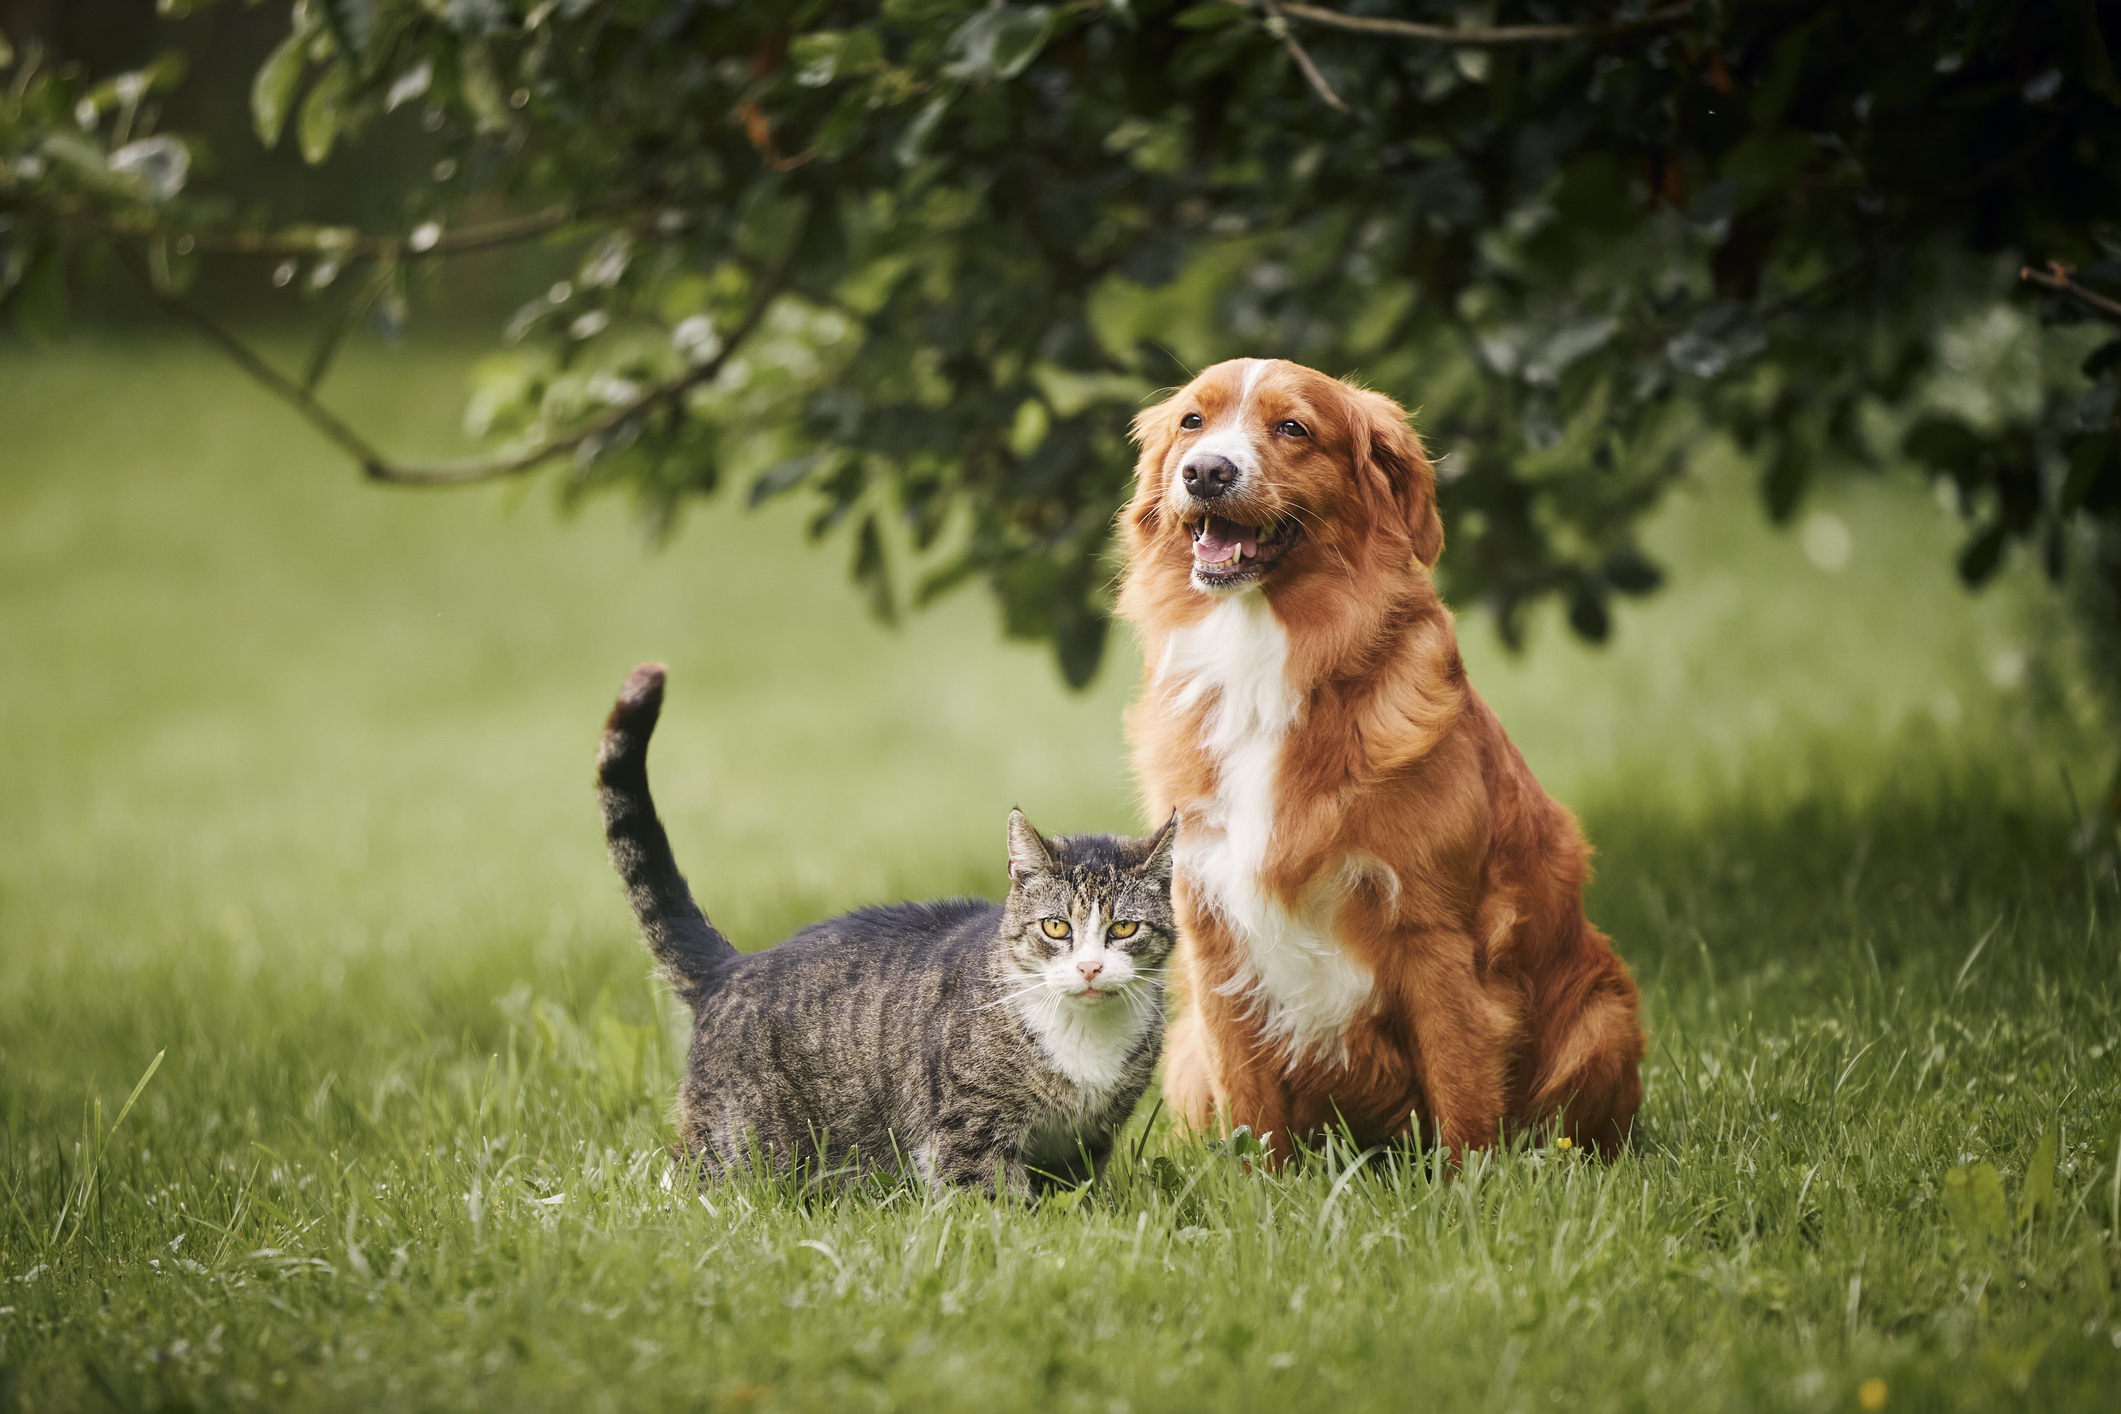 Cat and dog sitting together on meadow